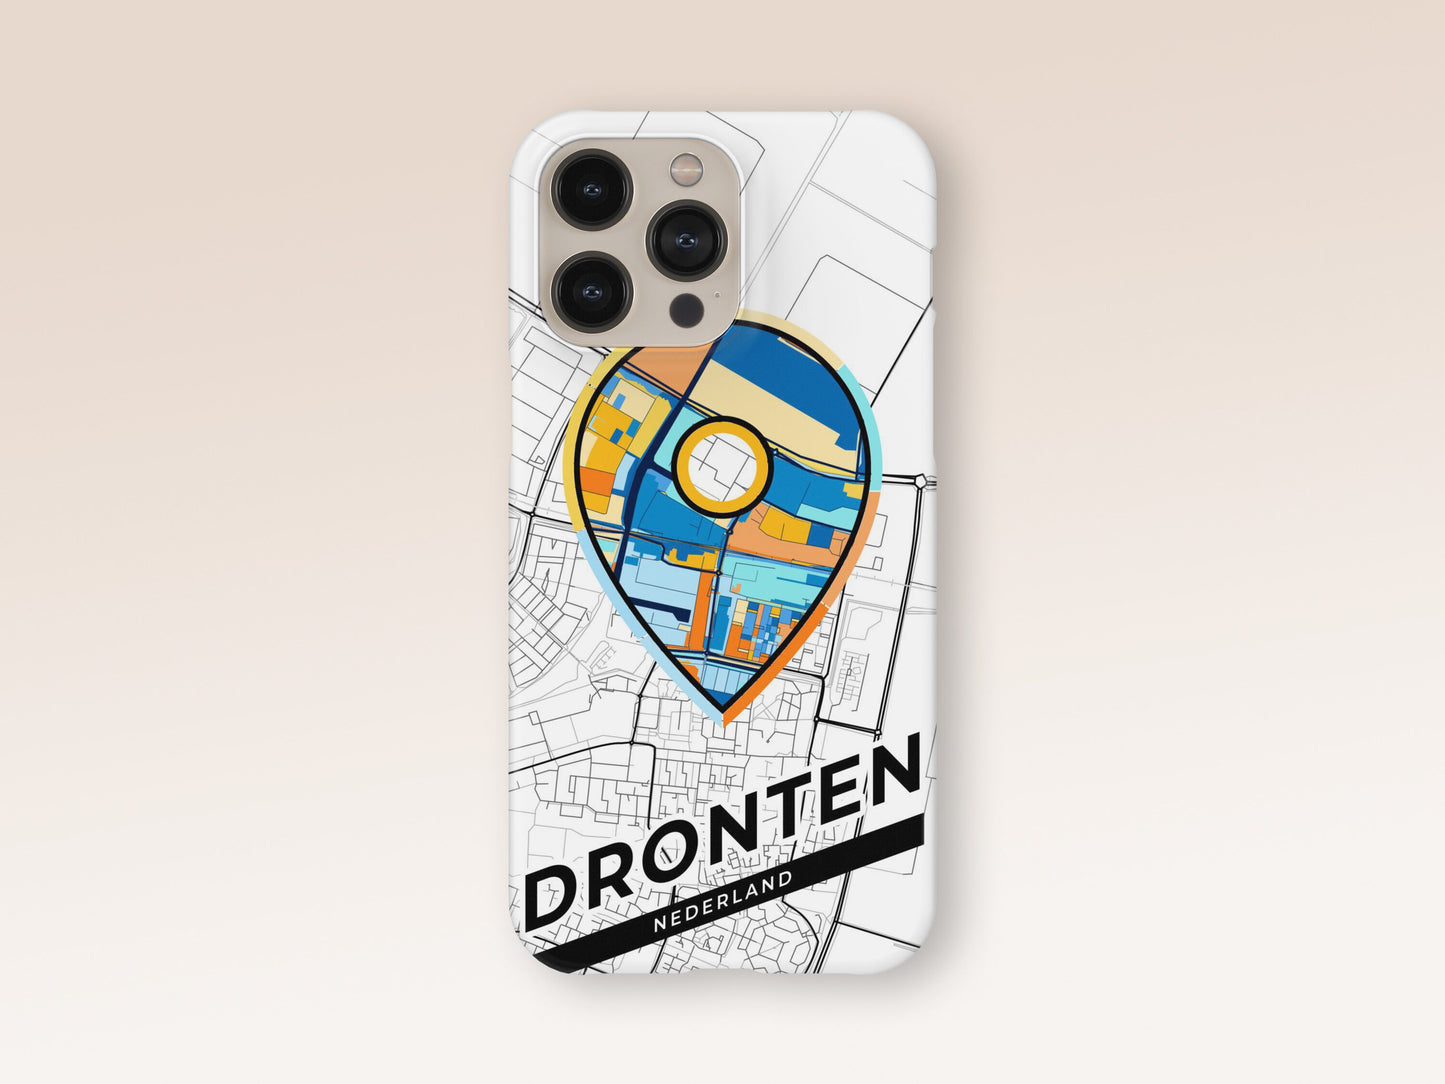 Dronten Netherlands slim phone case with colorful icon. Birthday, wedding or housewarming gift. Couple match cases. 1